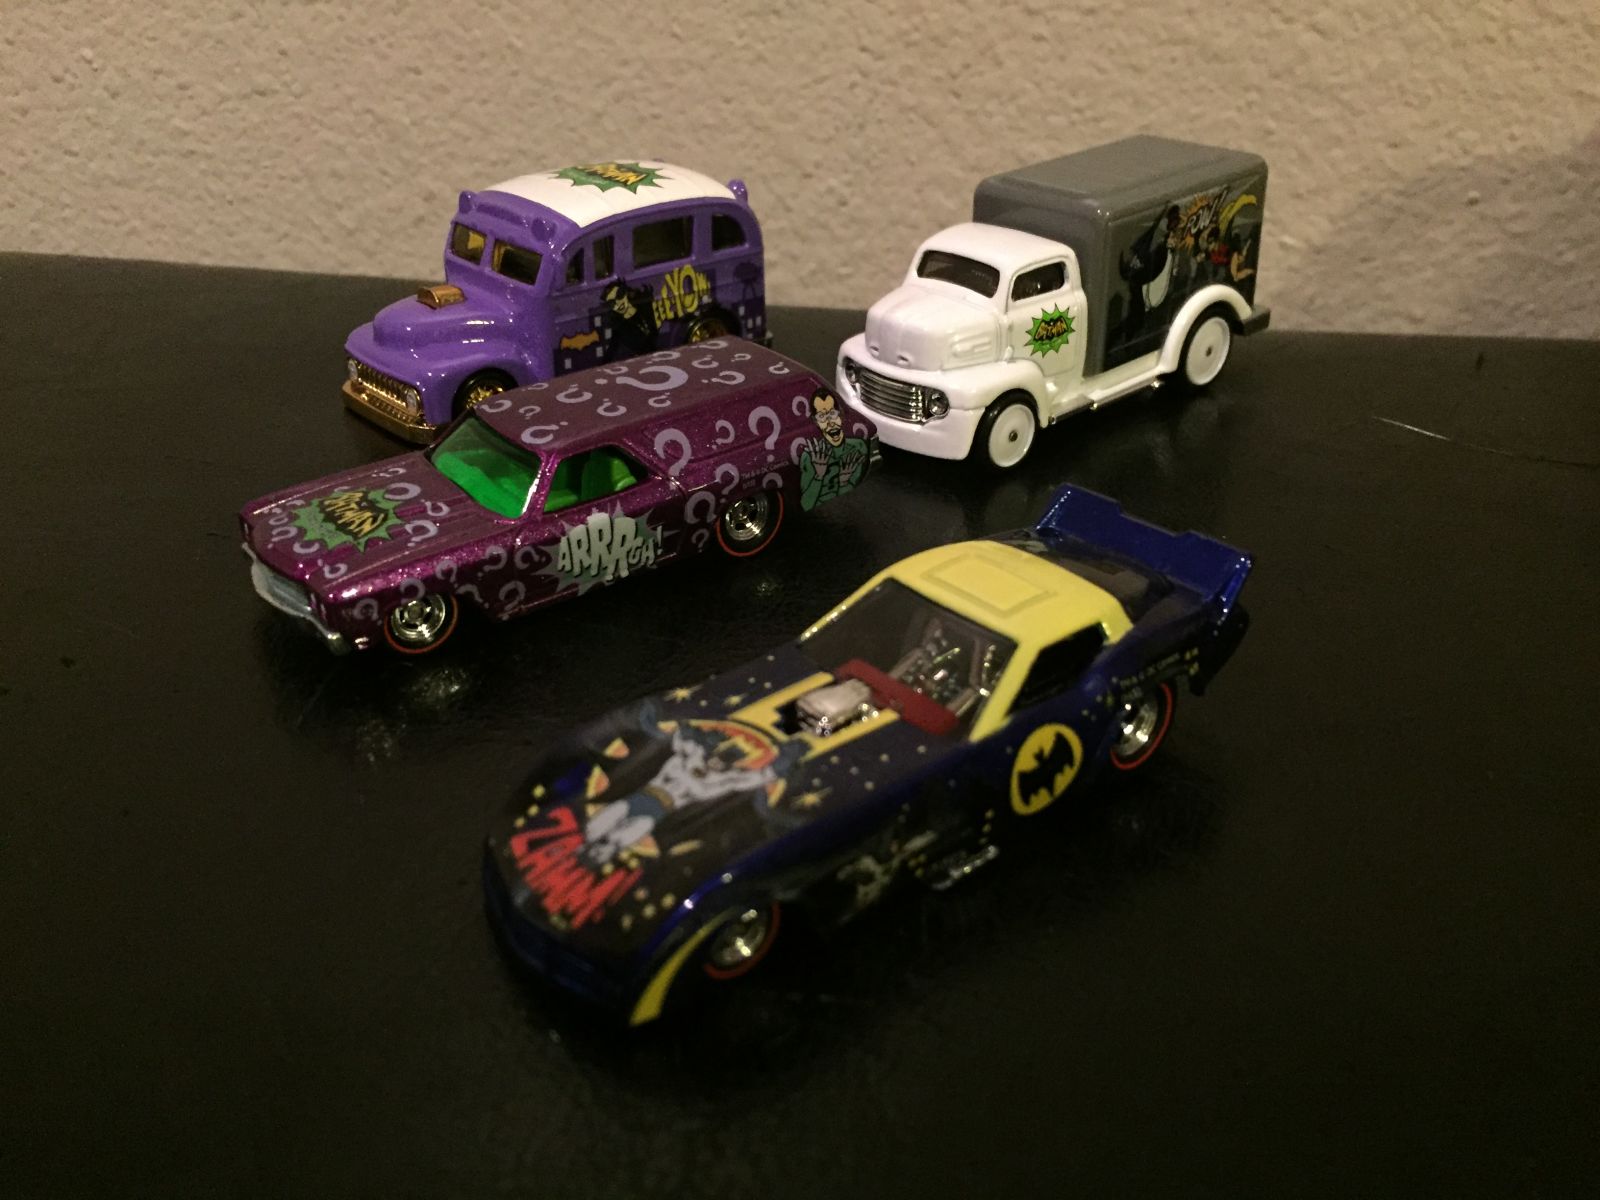 These pop cultures were only $2.29 so I grabbed some for wheel swaps. 